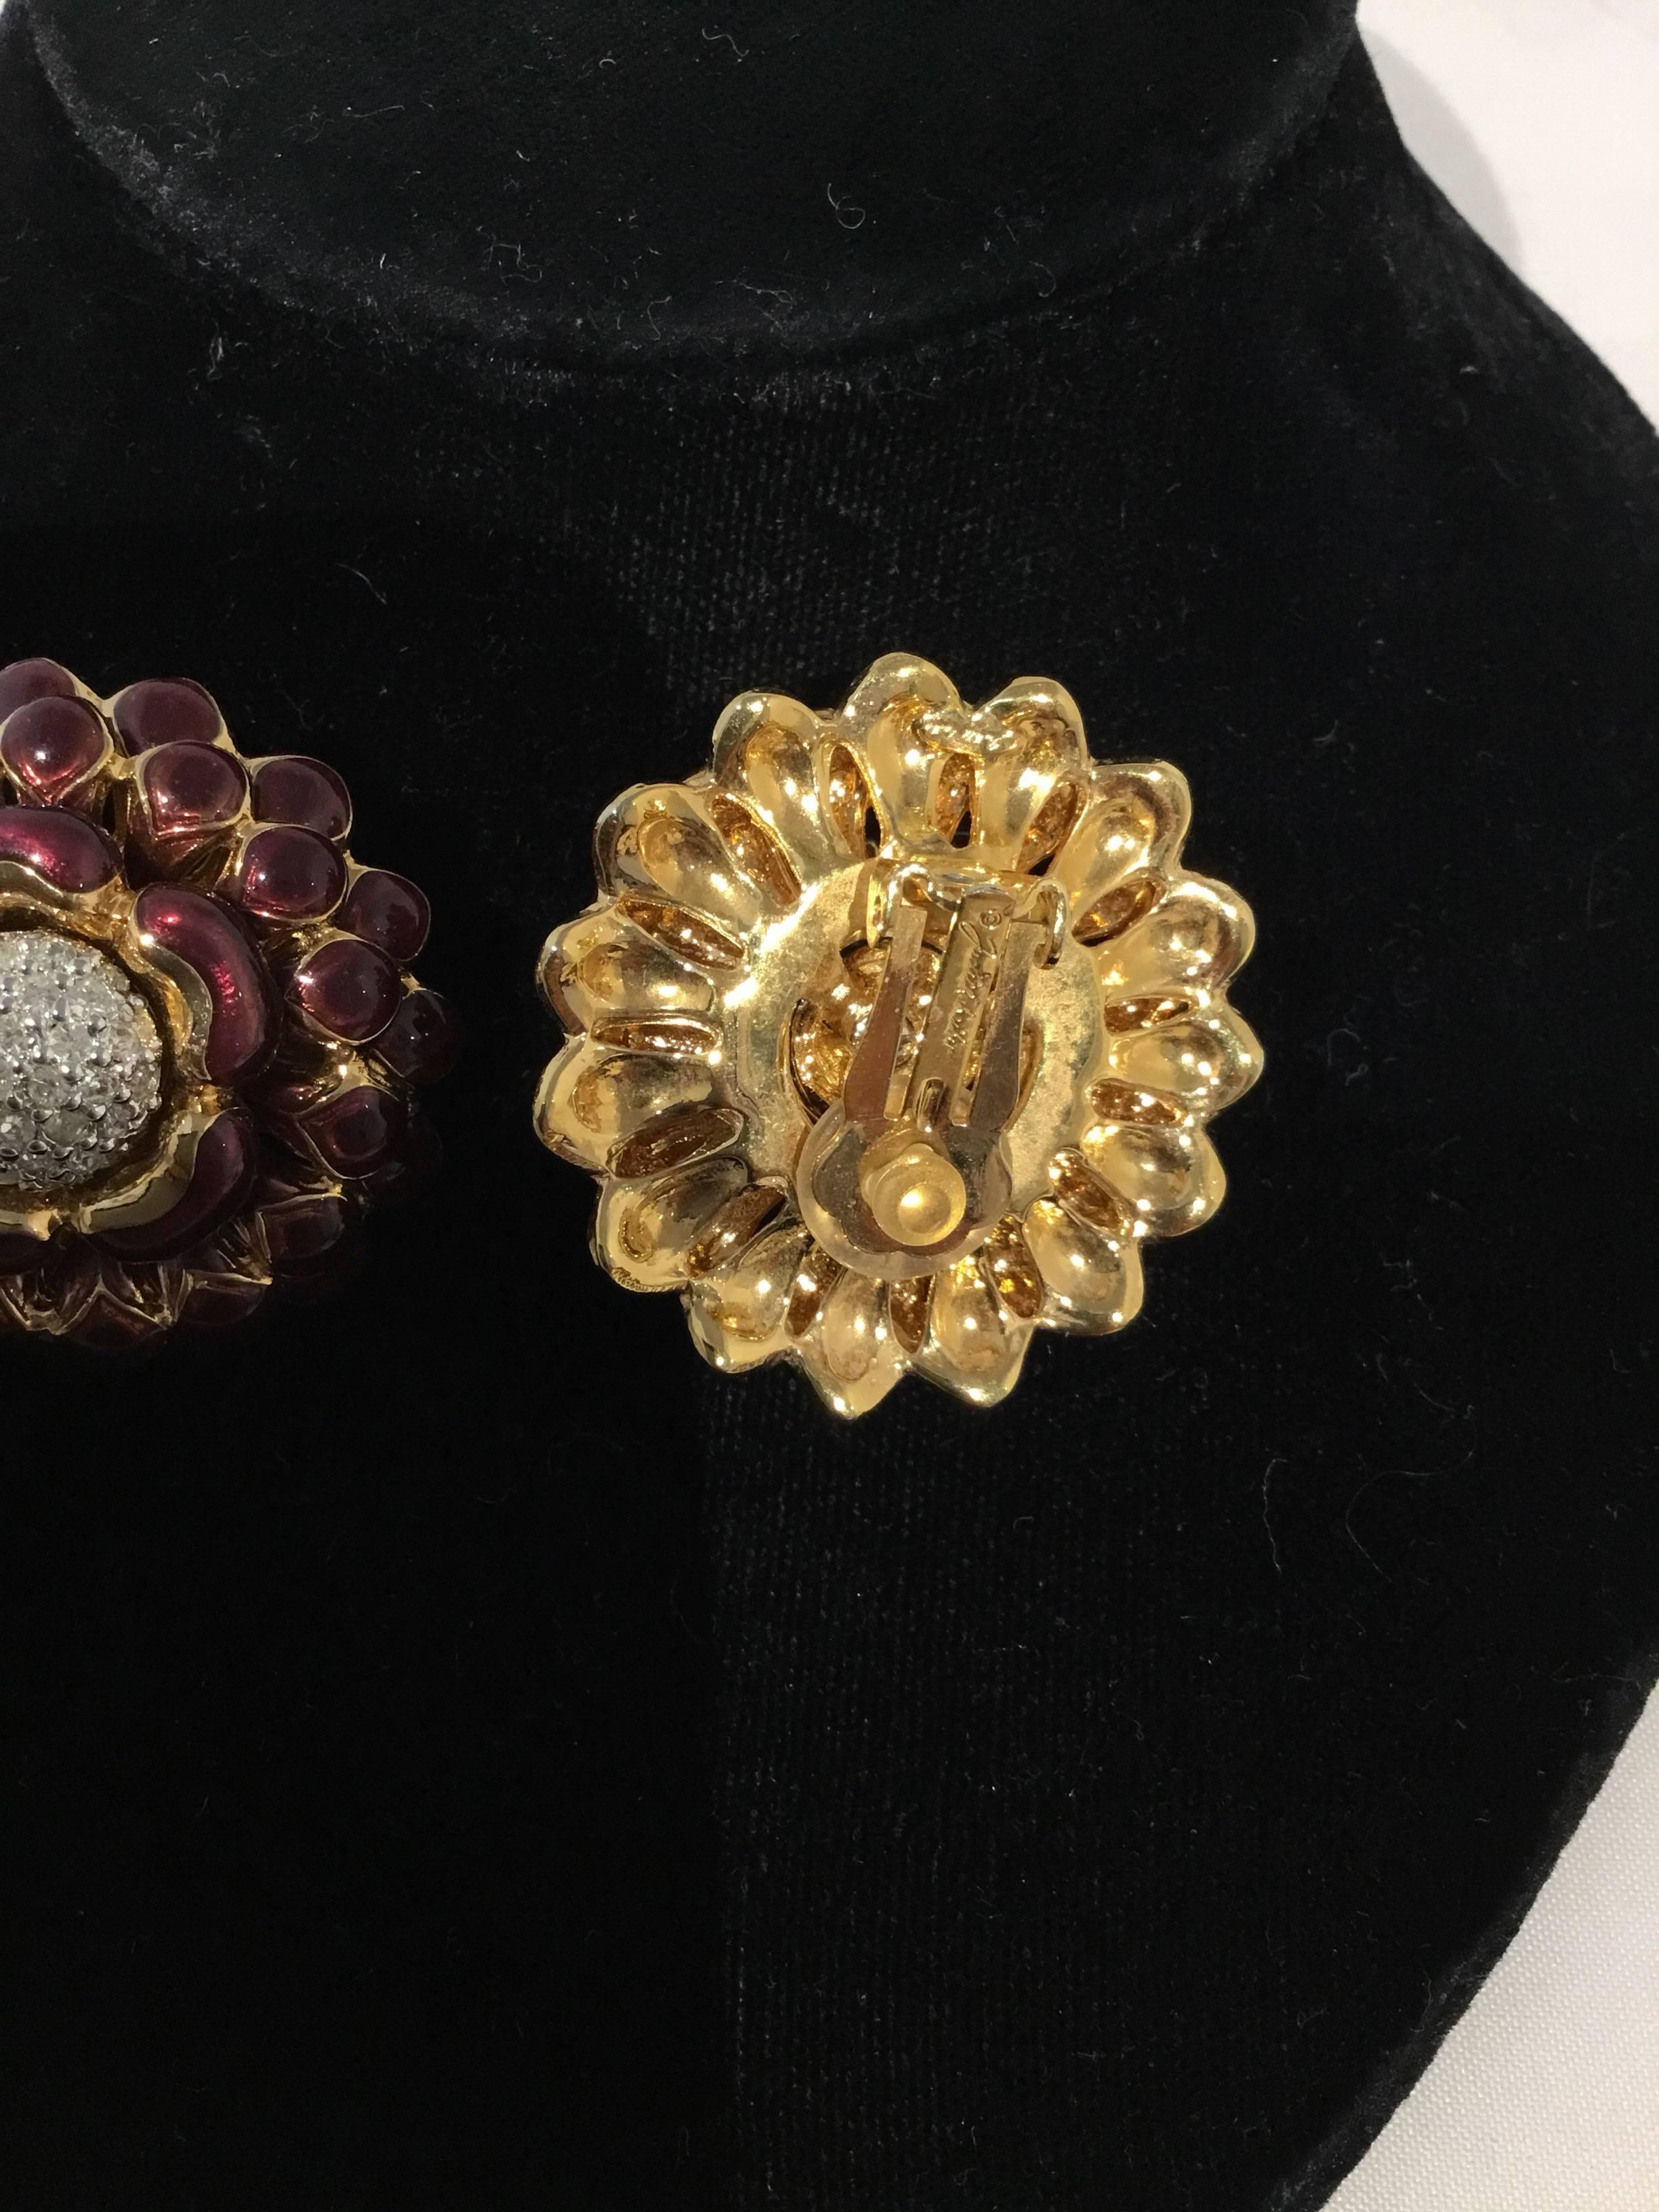 Contemporary Judith Leiber Enamel Flower Brooch and Clip On Earring Set